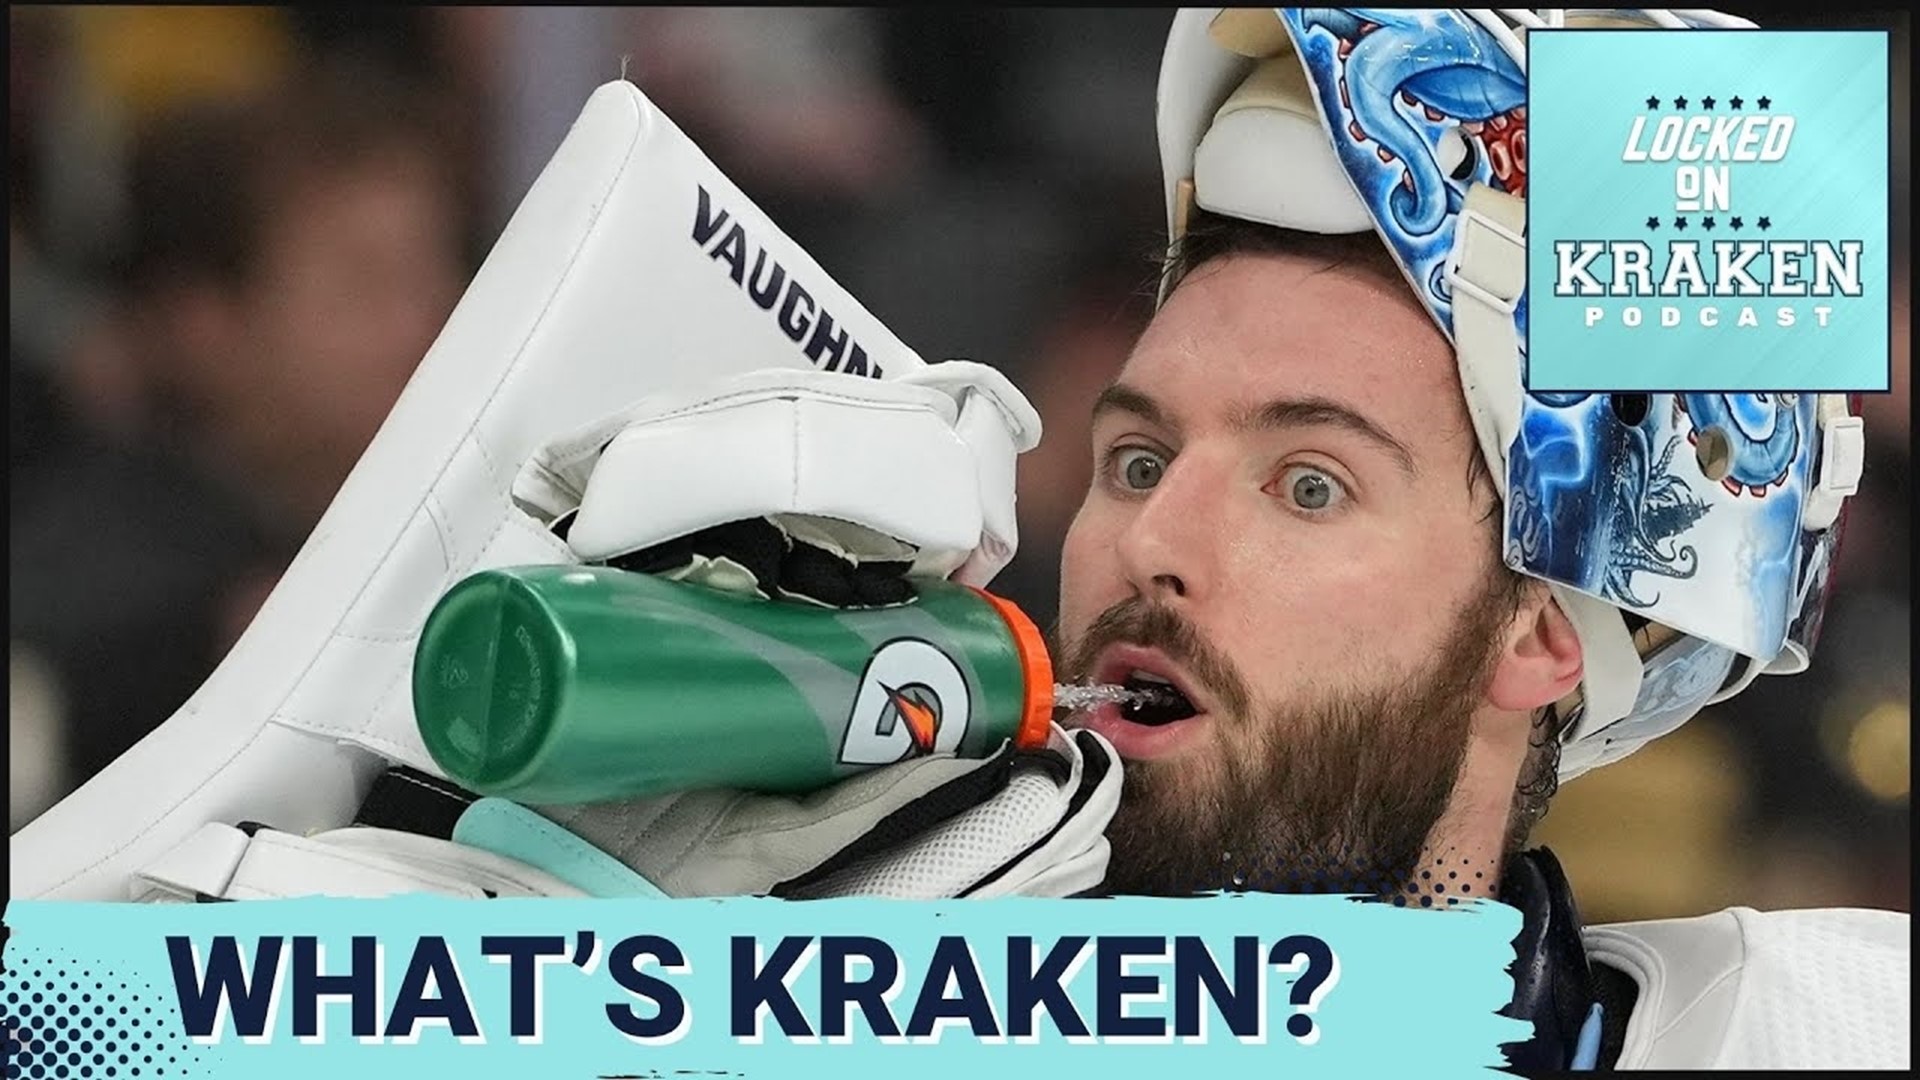 The Seattle Kraken have dropped eight straight games. One more loss would match the worst streak in franchise history.